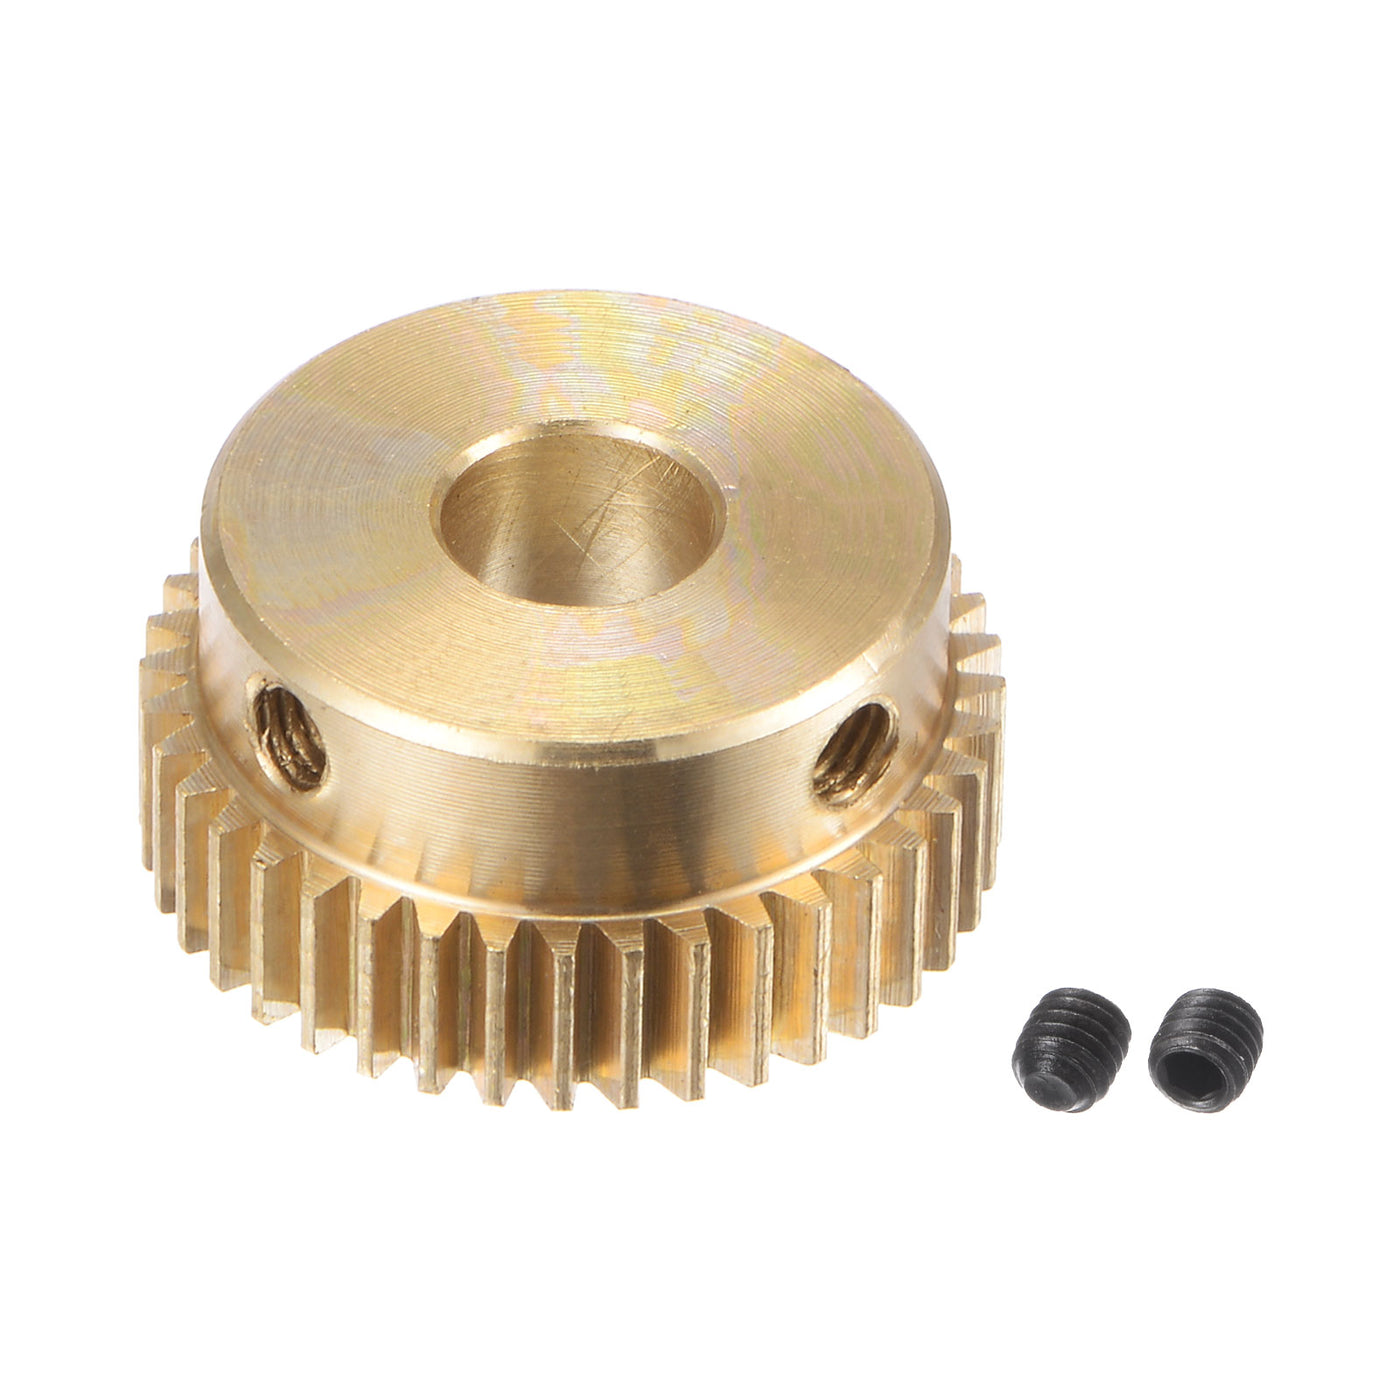 uxcell Uxcell 0.5 Mod 40T 6mm Bore 21mm Outer Dia Brass Motor Rack Pinion Gear with Screws